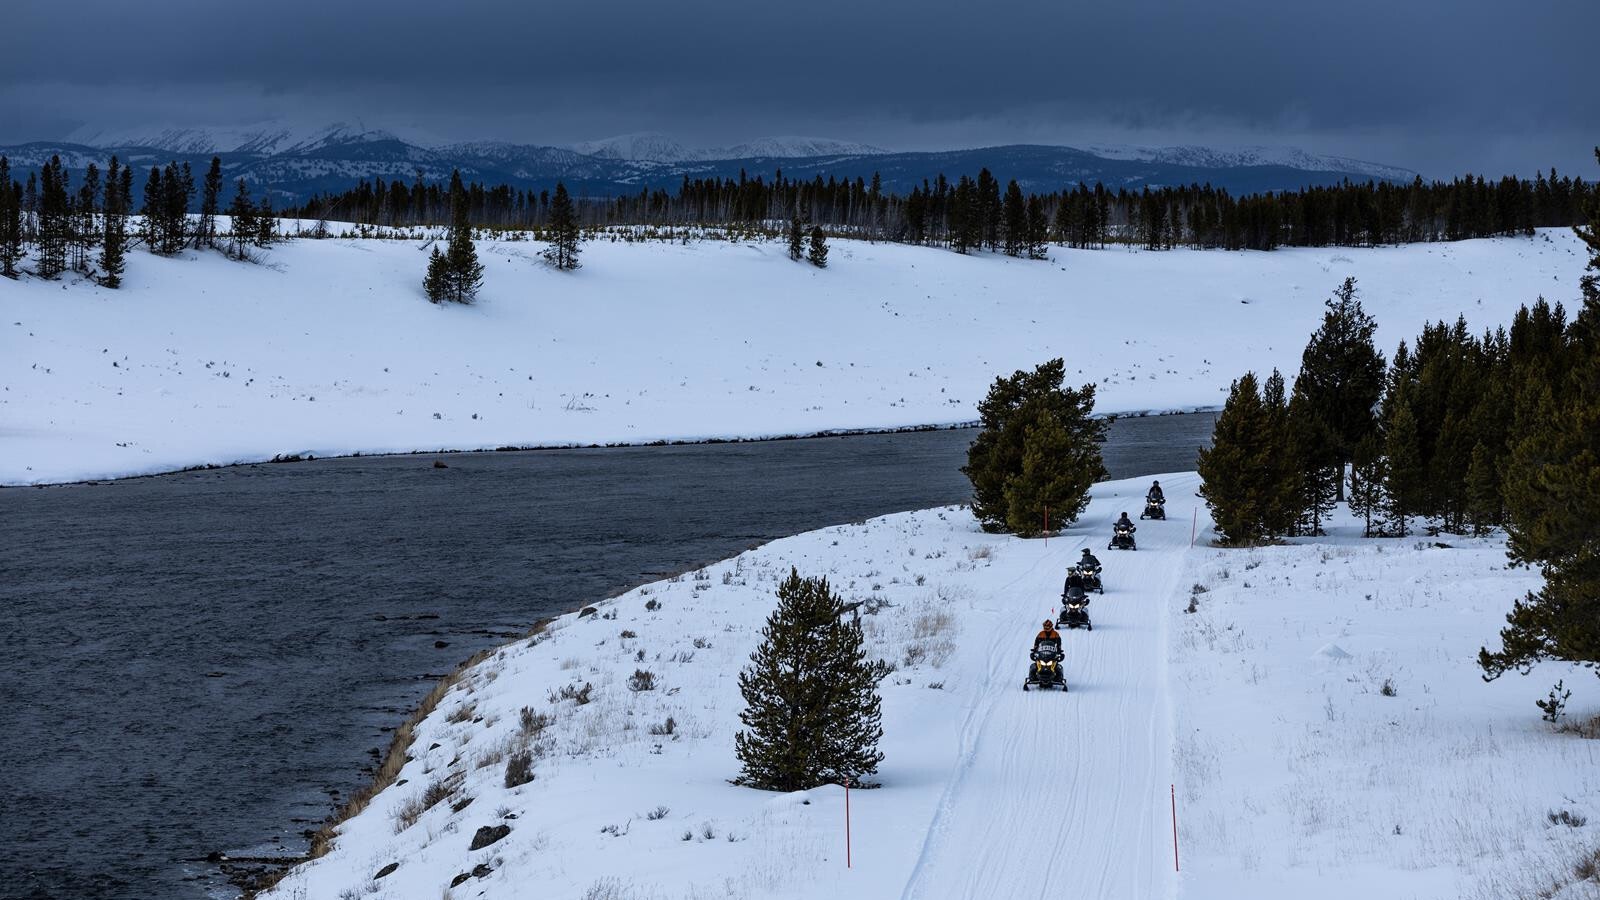 Seeing Yellowstone from a snowmobile is akin to catching salmon from the river and cooking them over a campfire. But instead of tastes and smells, you’ll remember sights and feelings.